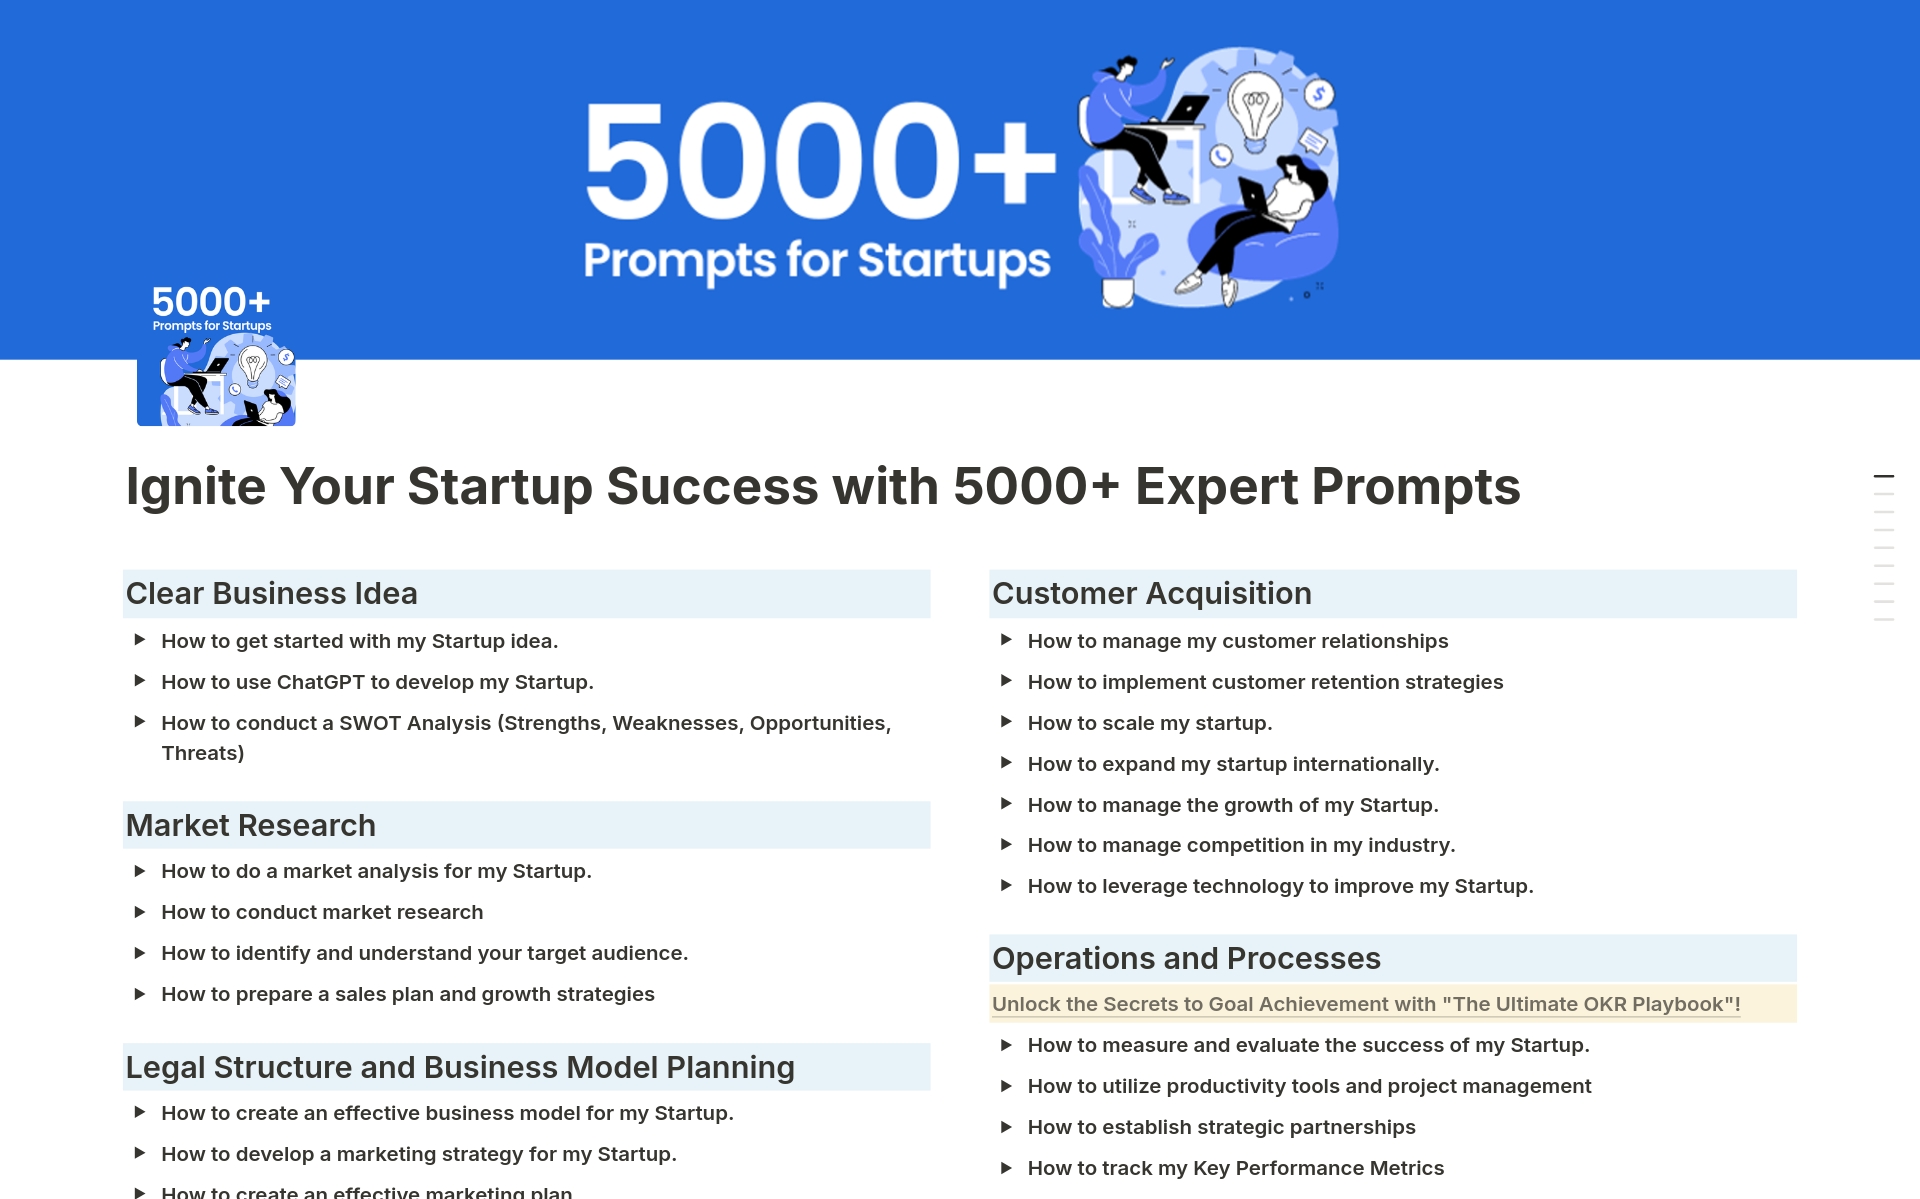 Ignite Your Startup Success with 5000+ Expert Prompts!